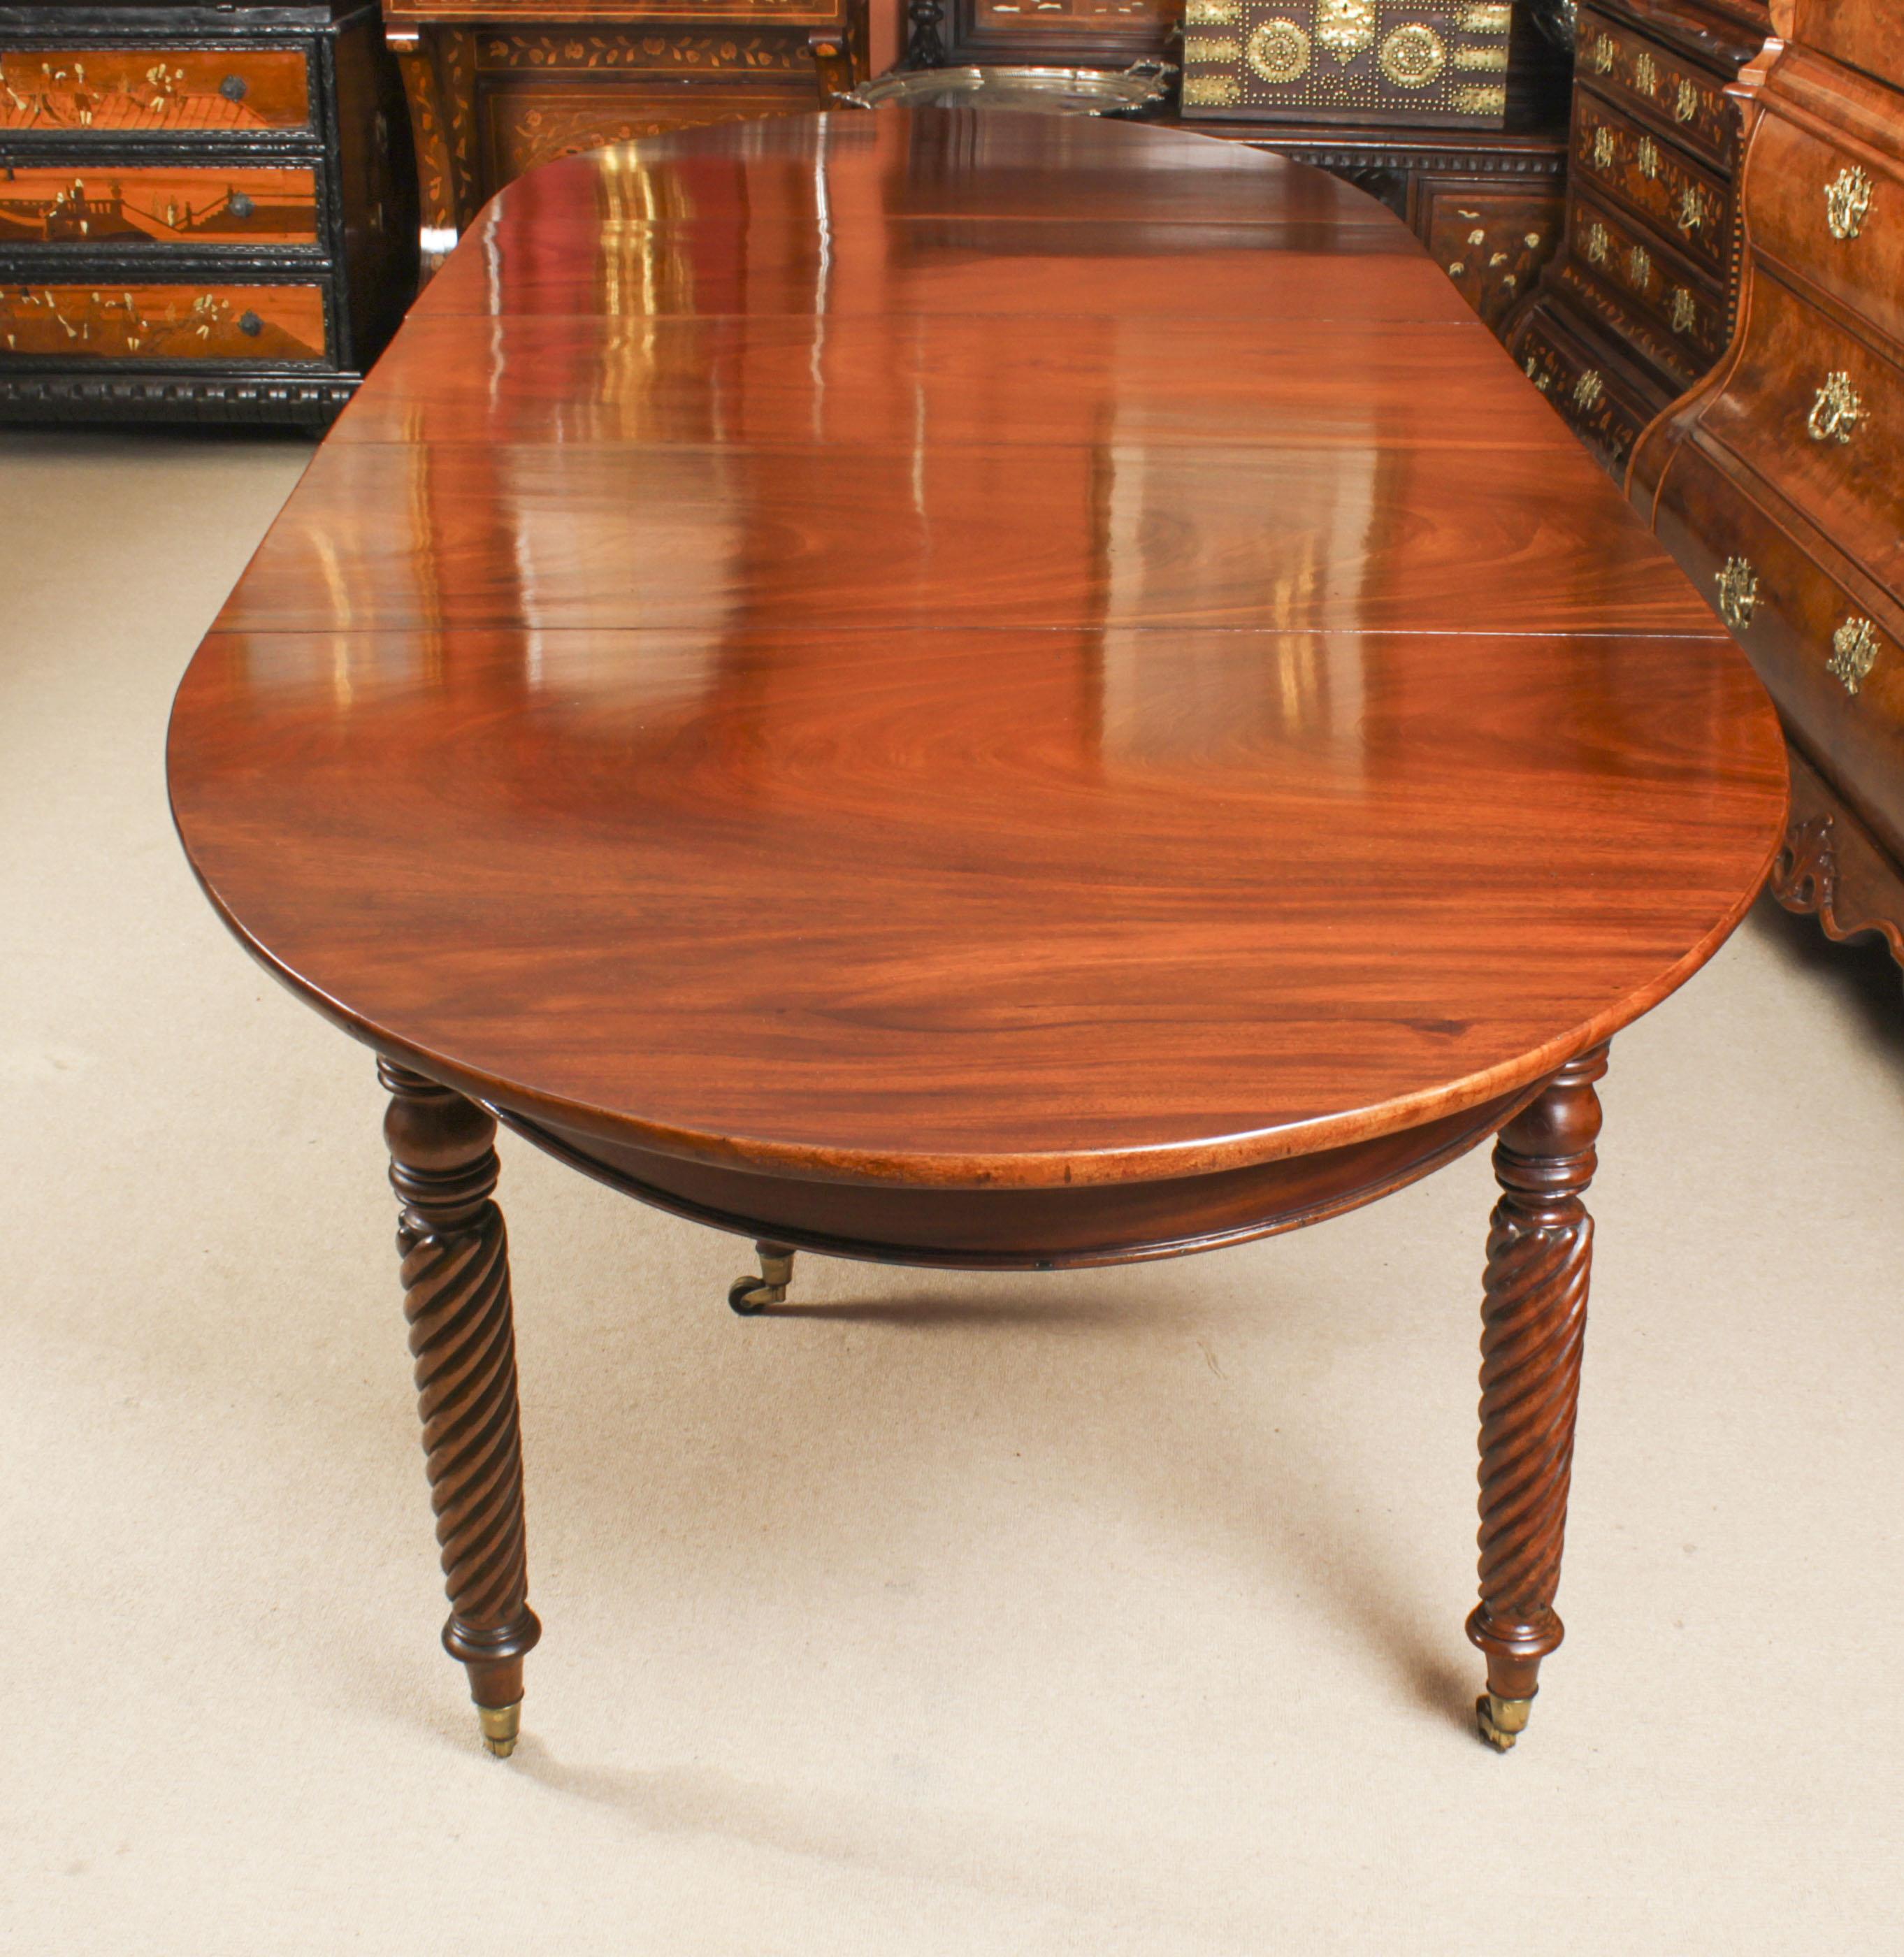 An extremely rare Regency Period Wilkinson Patent concertina action extending dining table in flame mahogany, Circa 1820 in date.

It has three original extension leaves and eight twist reeded legs all fitted with brass castors. This type of